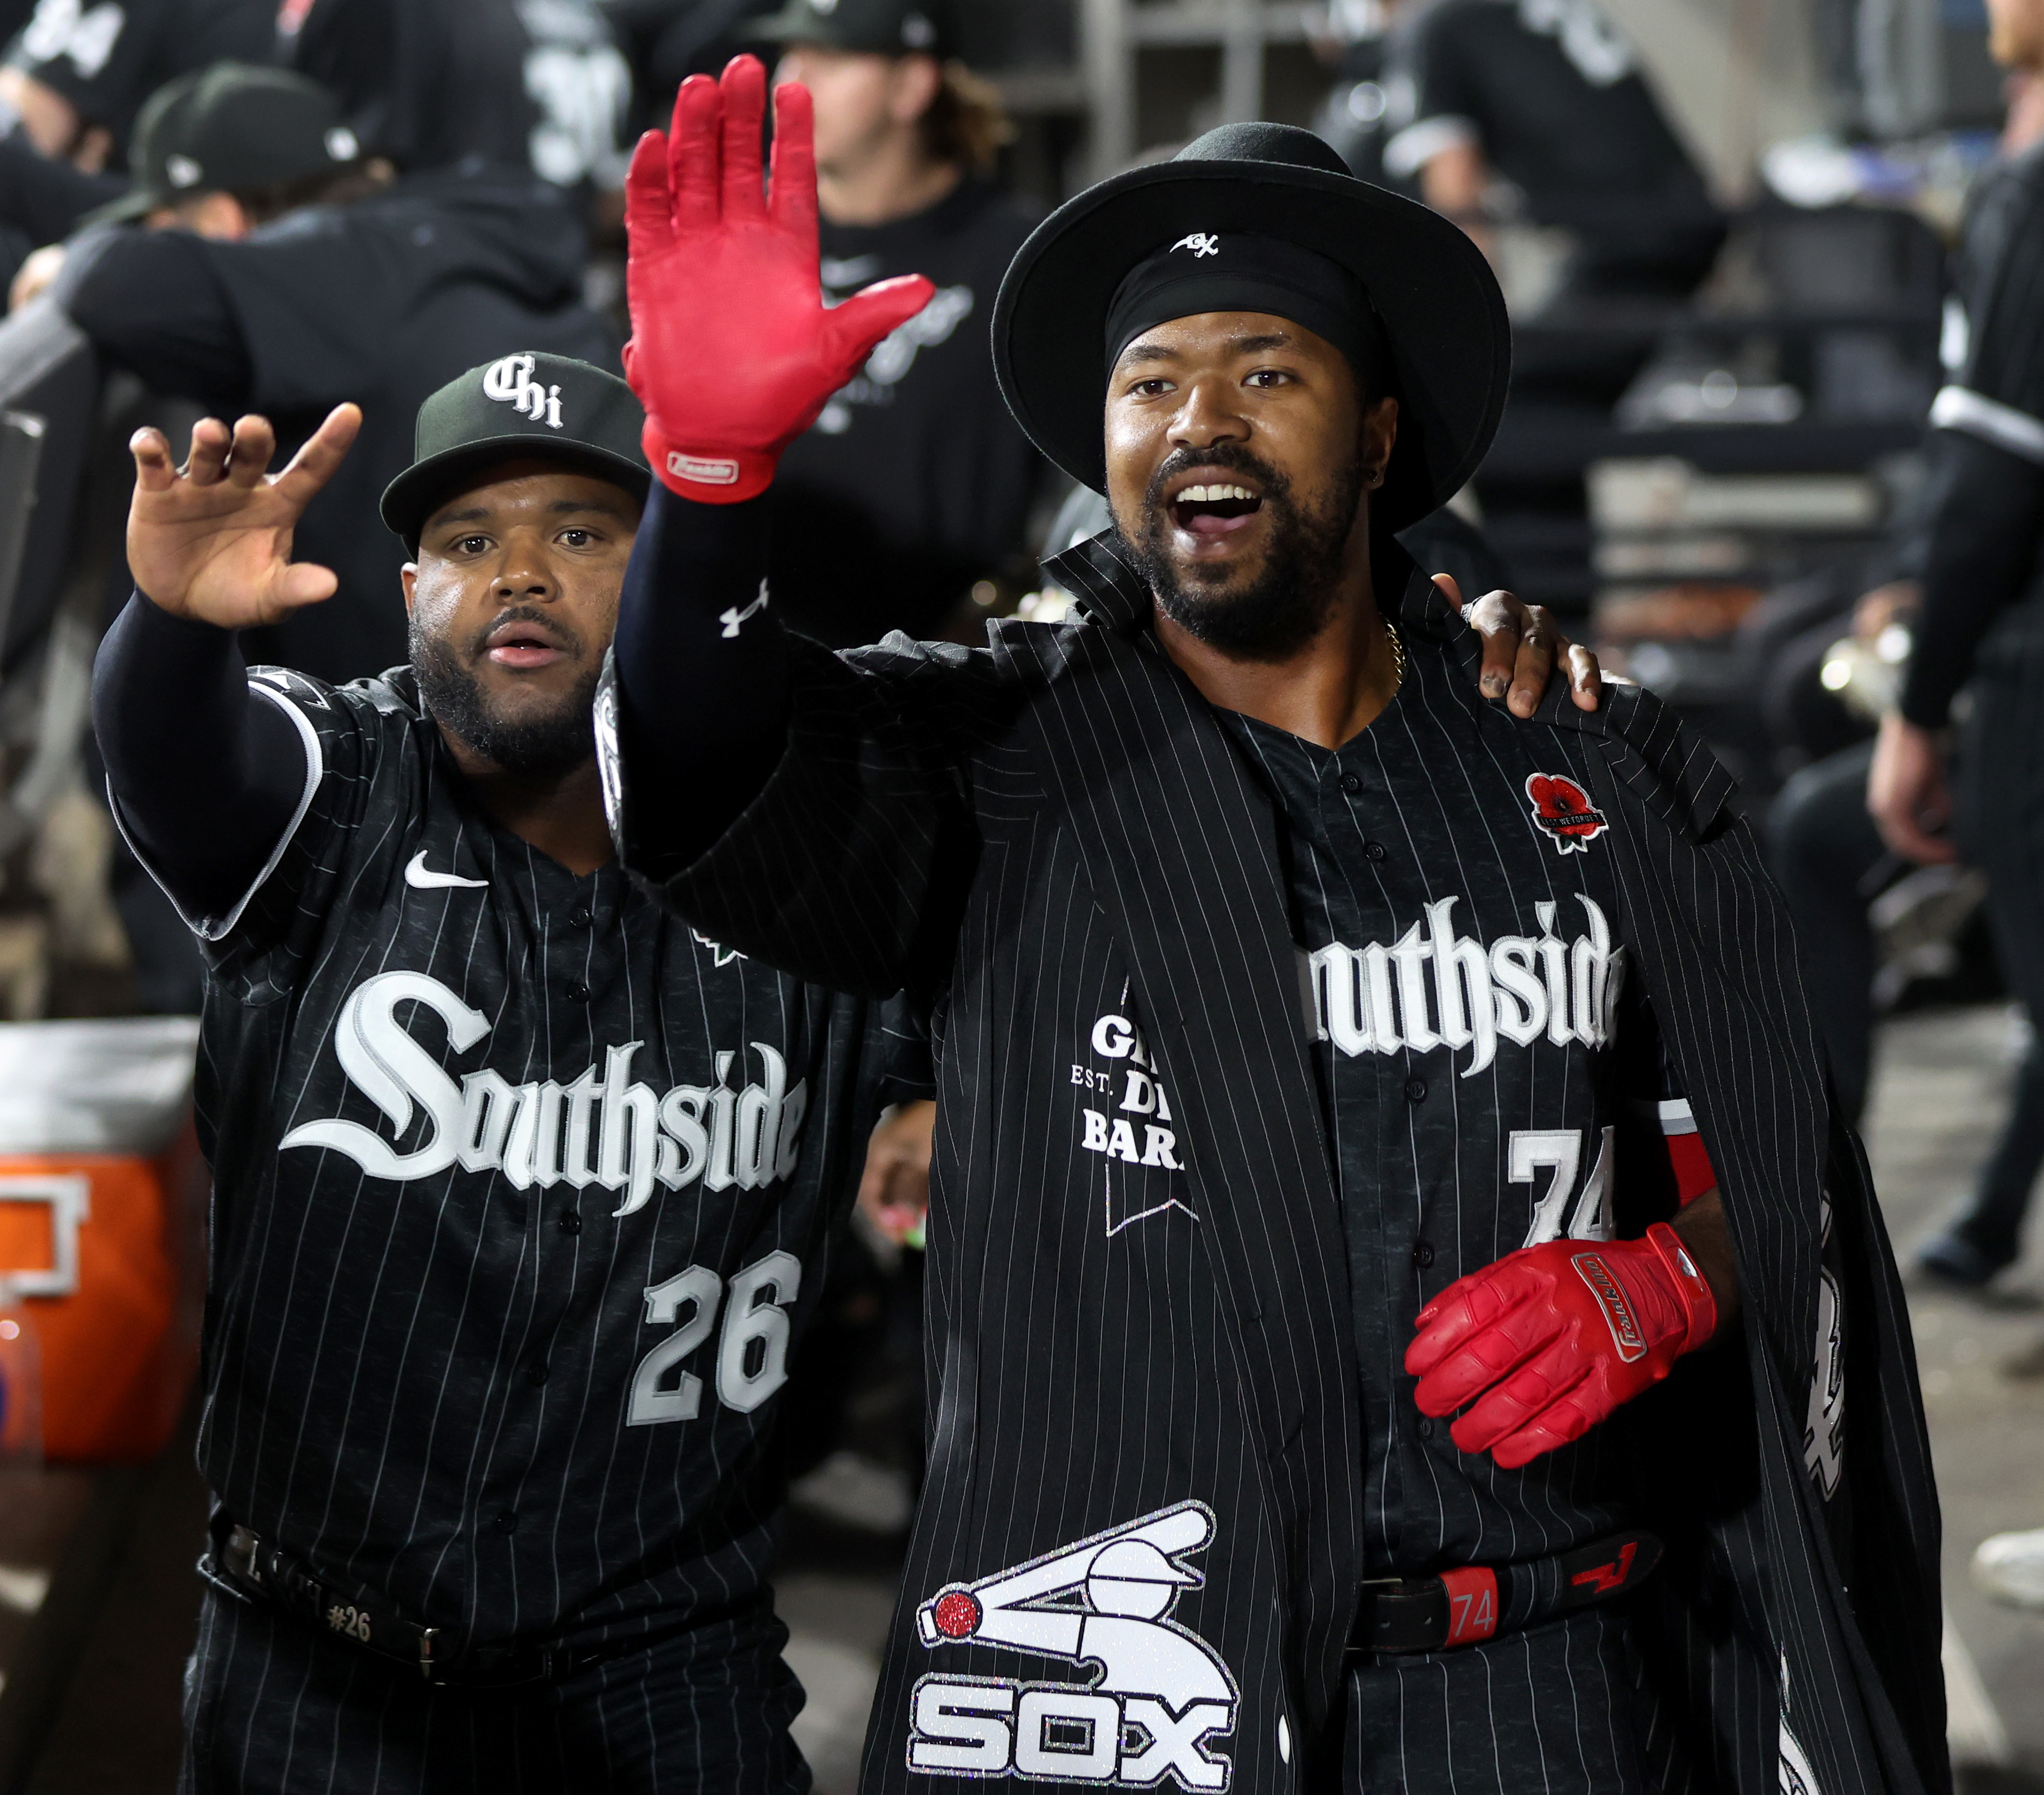 Fun with numbers: White Sox jerseys edition - South Side Sox